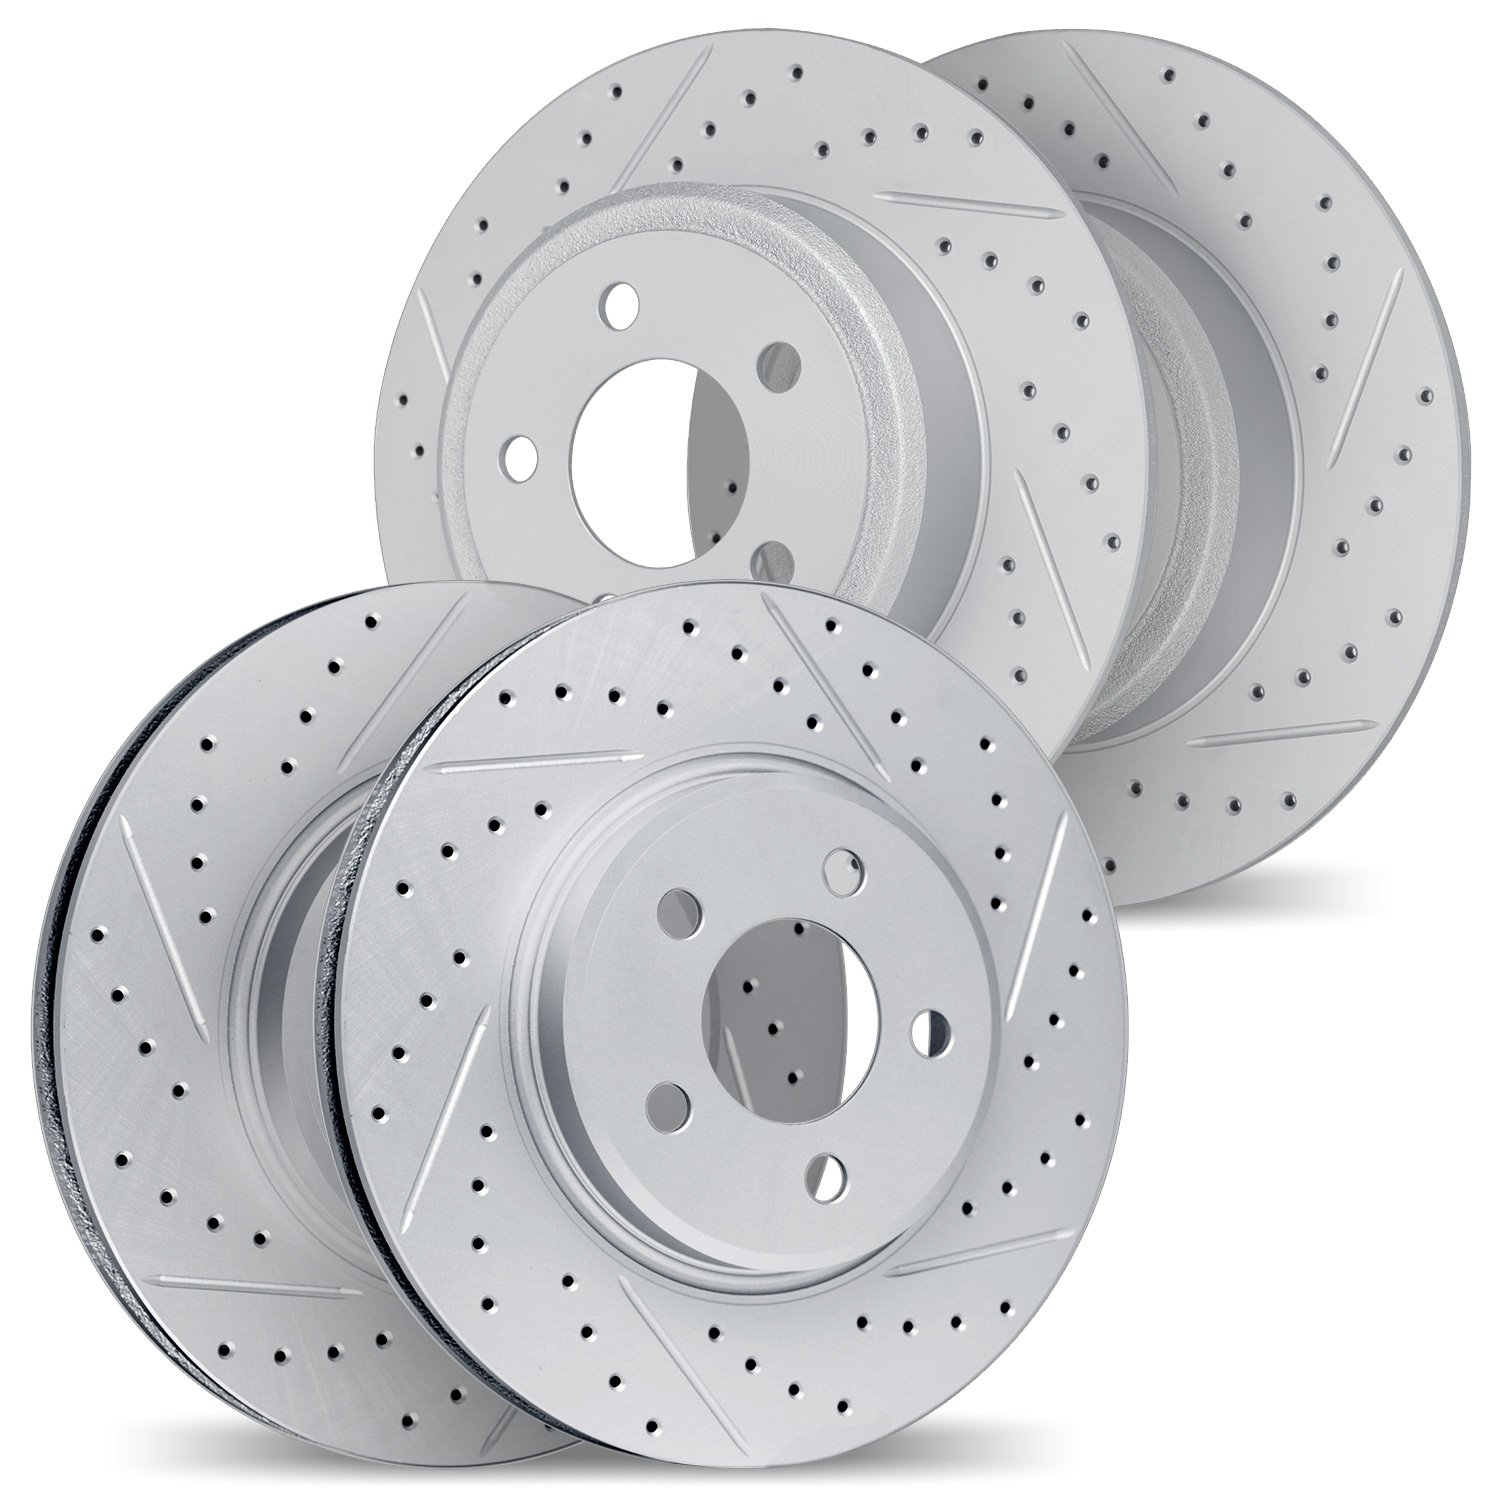 2004-80006 Geoperformance Drilled/Slotted Brake Rotors, 2004-2013 Ford/Lincoln/Mercury/Mazda, Position: Front and Rear